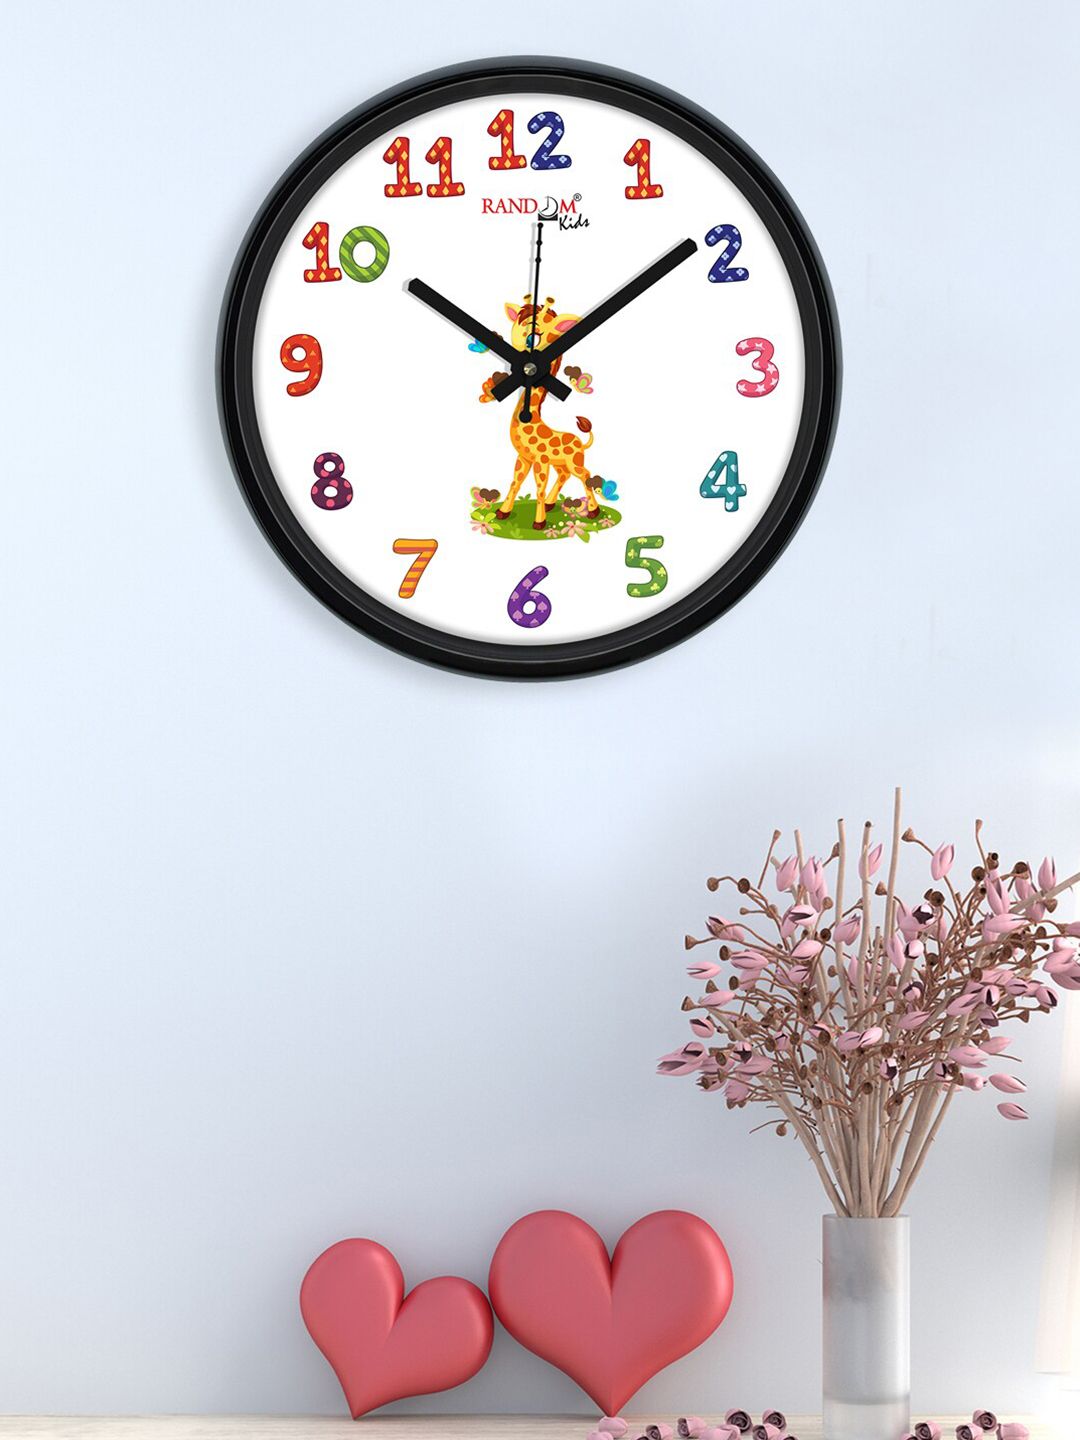 RANDOM White Printed Plastic Wall Clock With Glass - 12 Inches Price in India